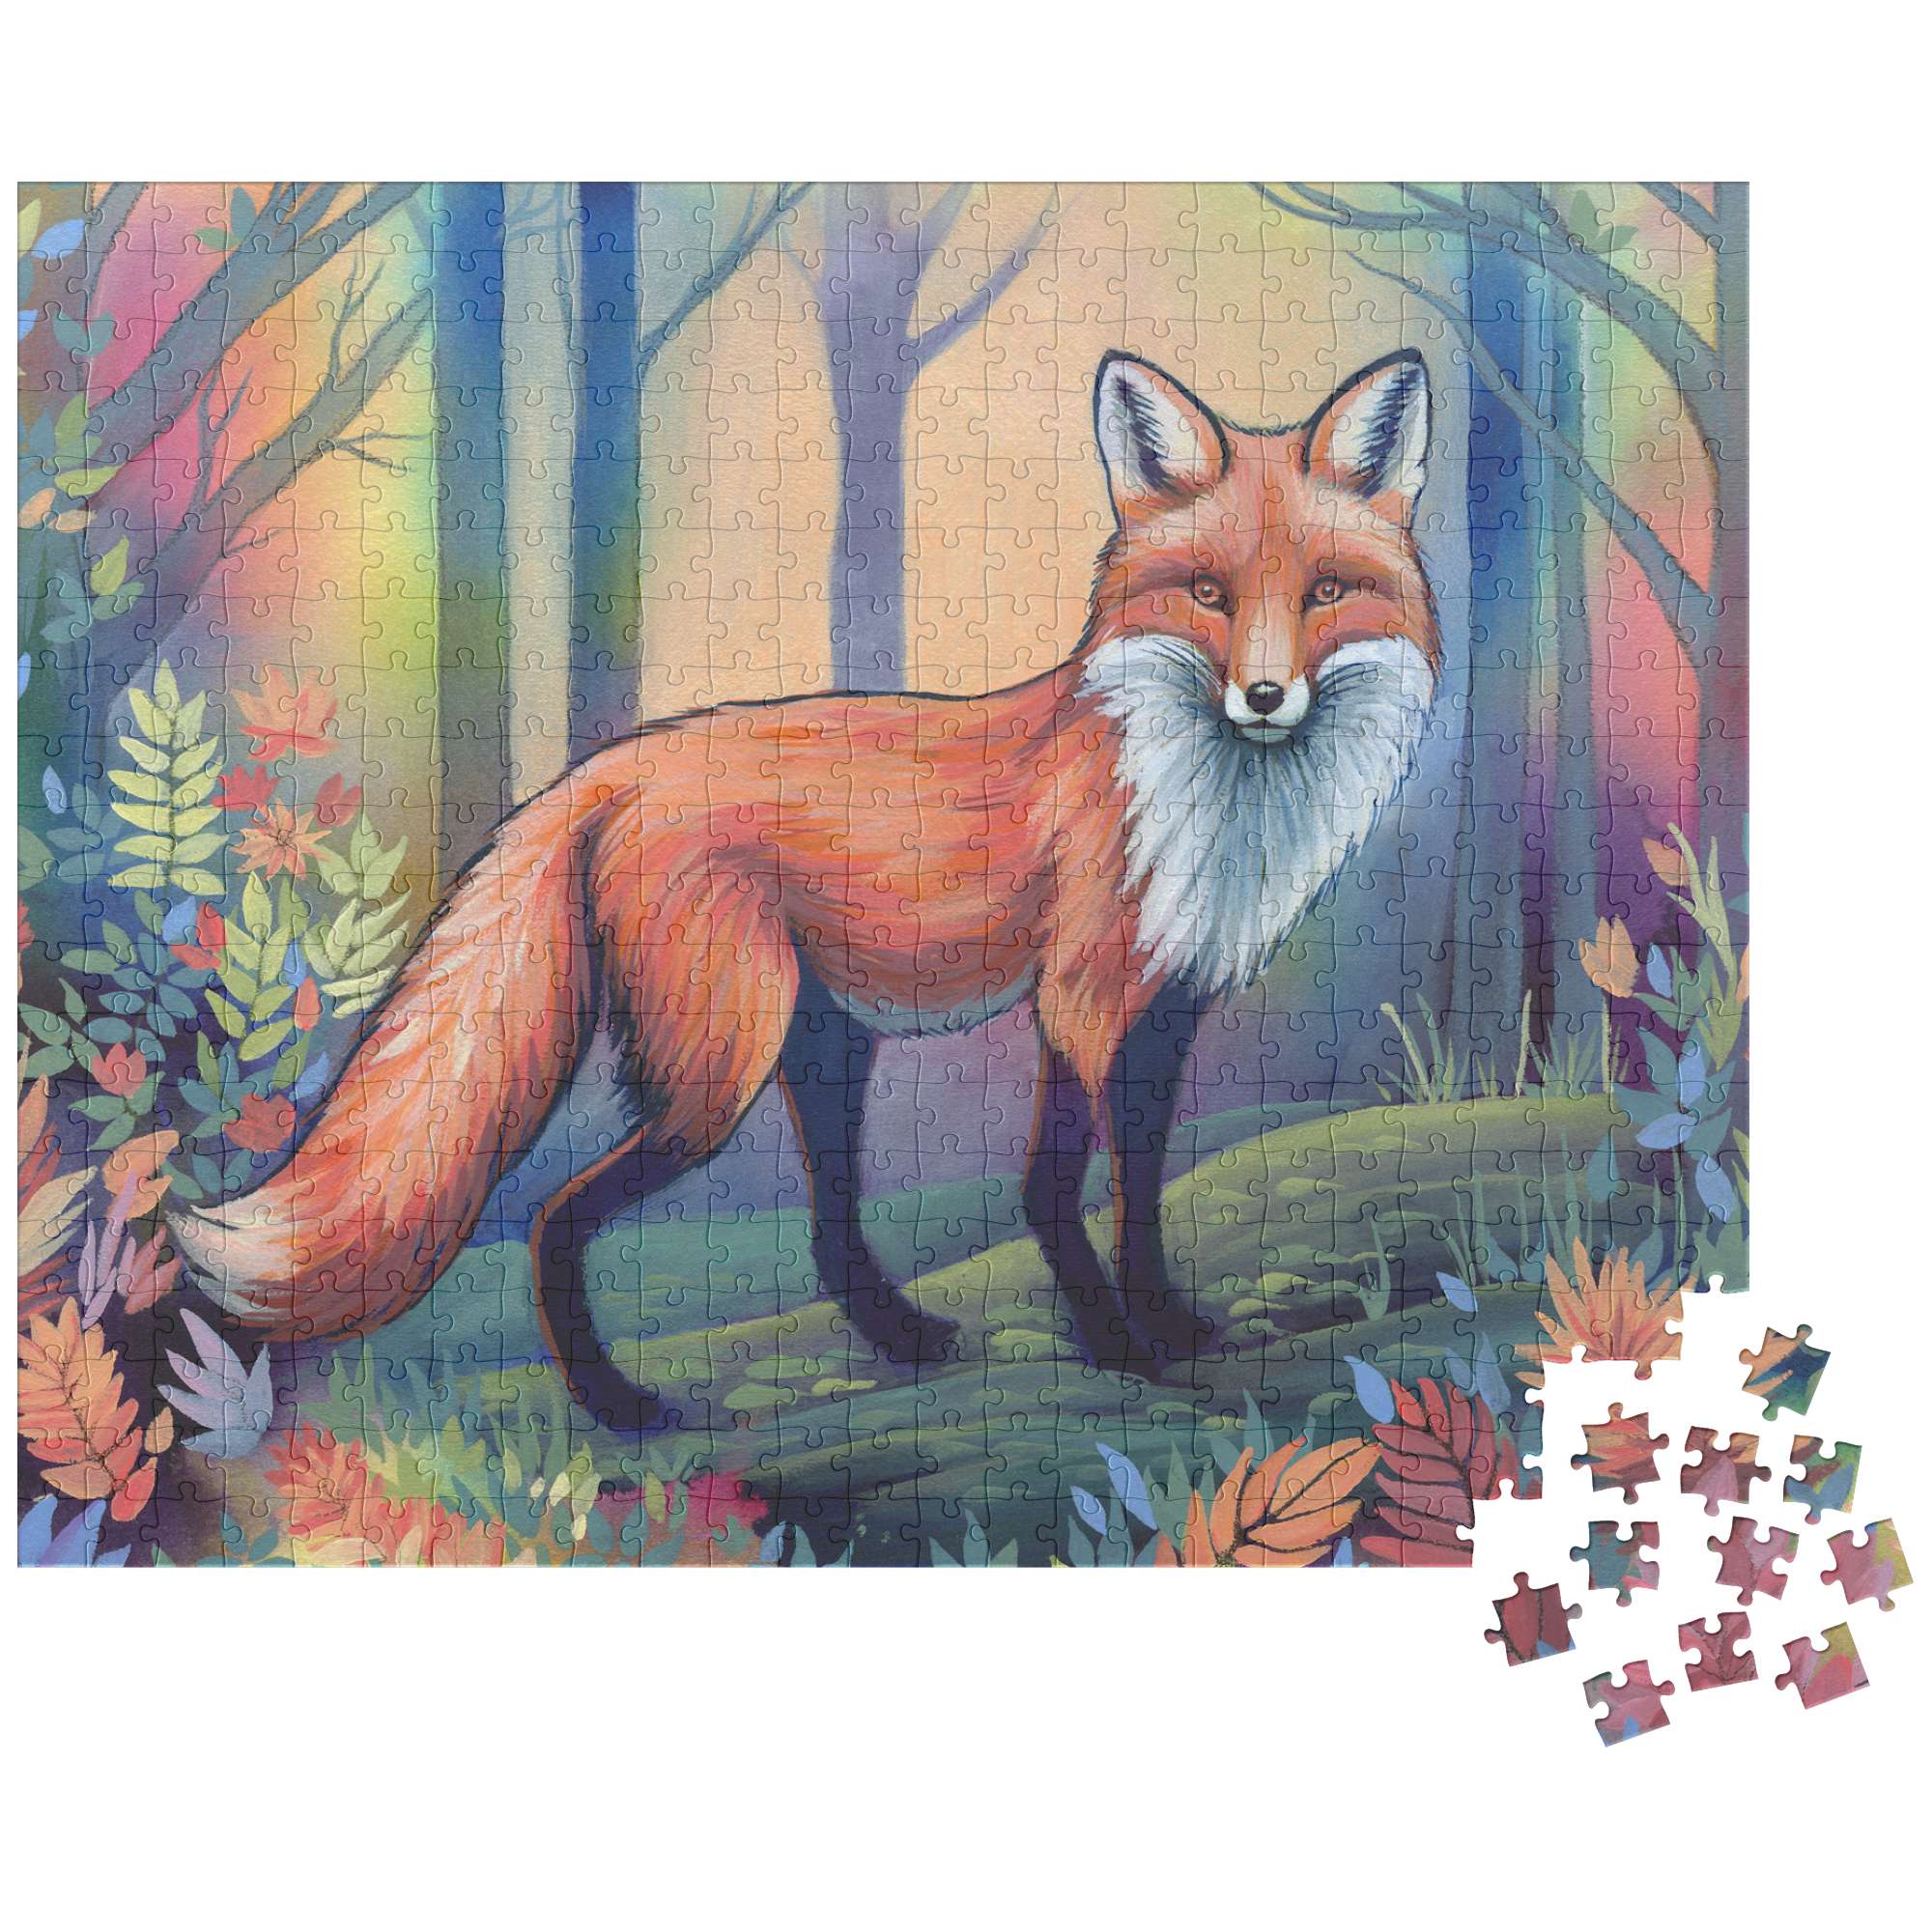 A 500 piece Fox Puzzle depicting a fox in a colorful forest, partially completed with loose pieces nearby.